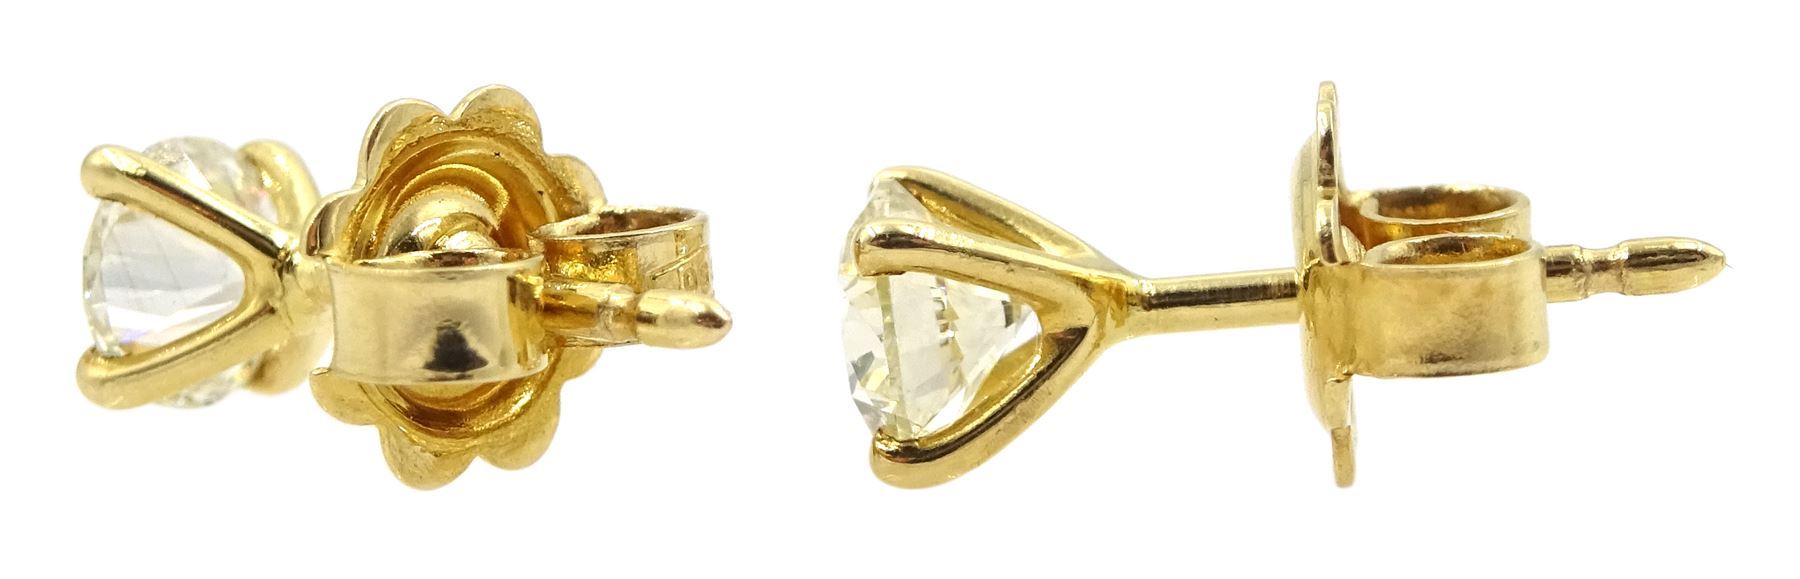 Pair of 18ct gold round brilliant cut diamond stud earrings - Image 2 of 2